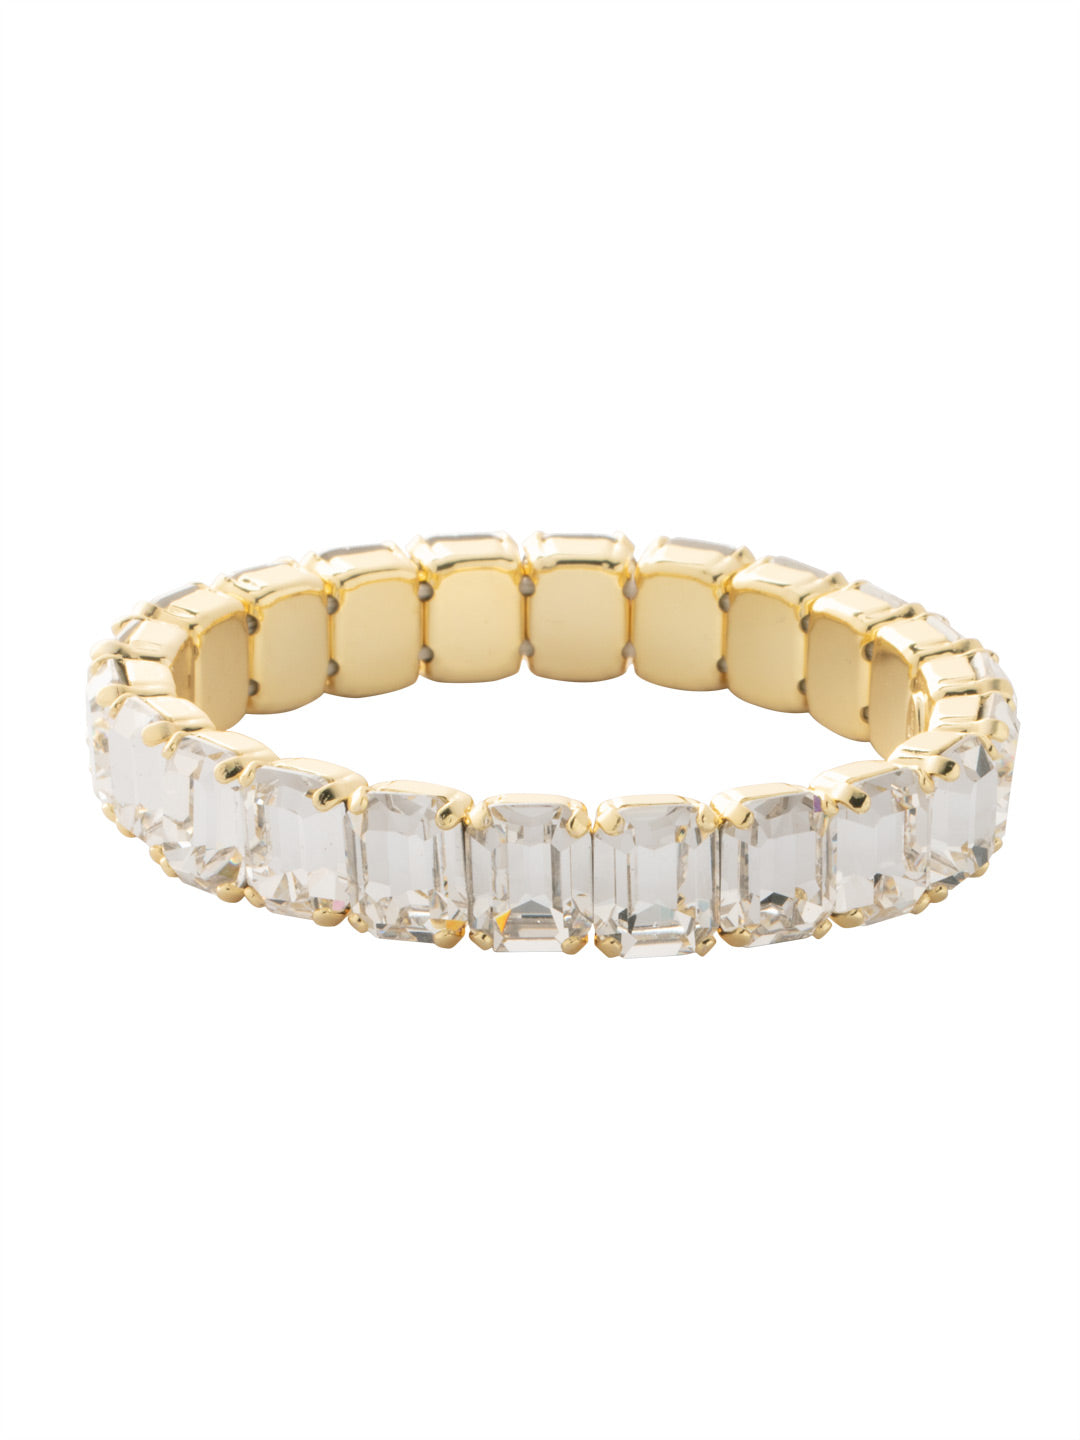 Octavia Stretch Bracelet - BFM30BGCRY - <p>The Octavia Stretch Bracelet features a line of emerald cut crystals on a sturdy jewelers' filament, stretching to fit most wrists comfortably, without the hassle of a clasp! From Sorrelli's Crystal collection in our Bright Gold-tone finish.</p>